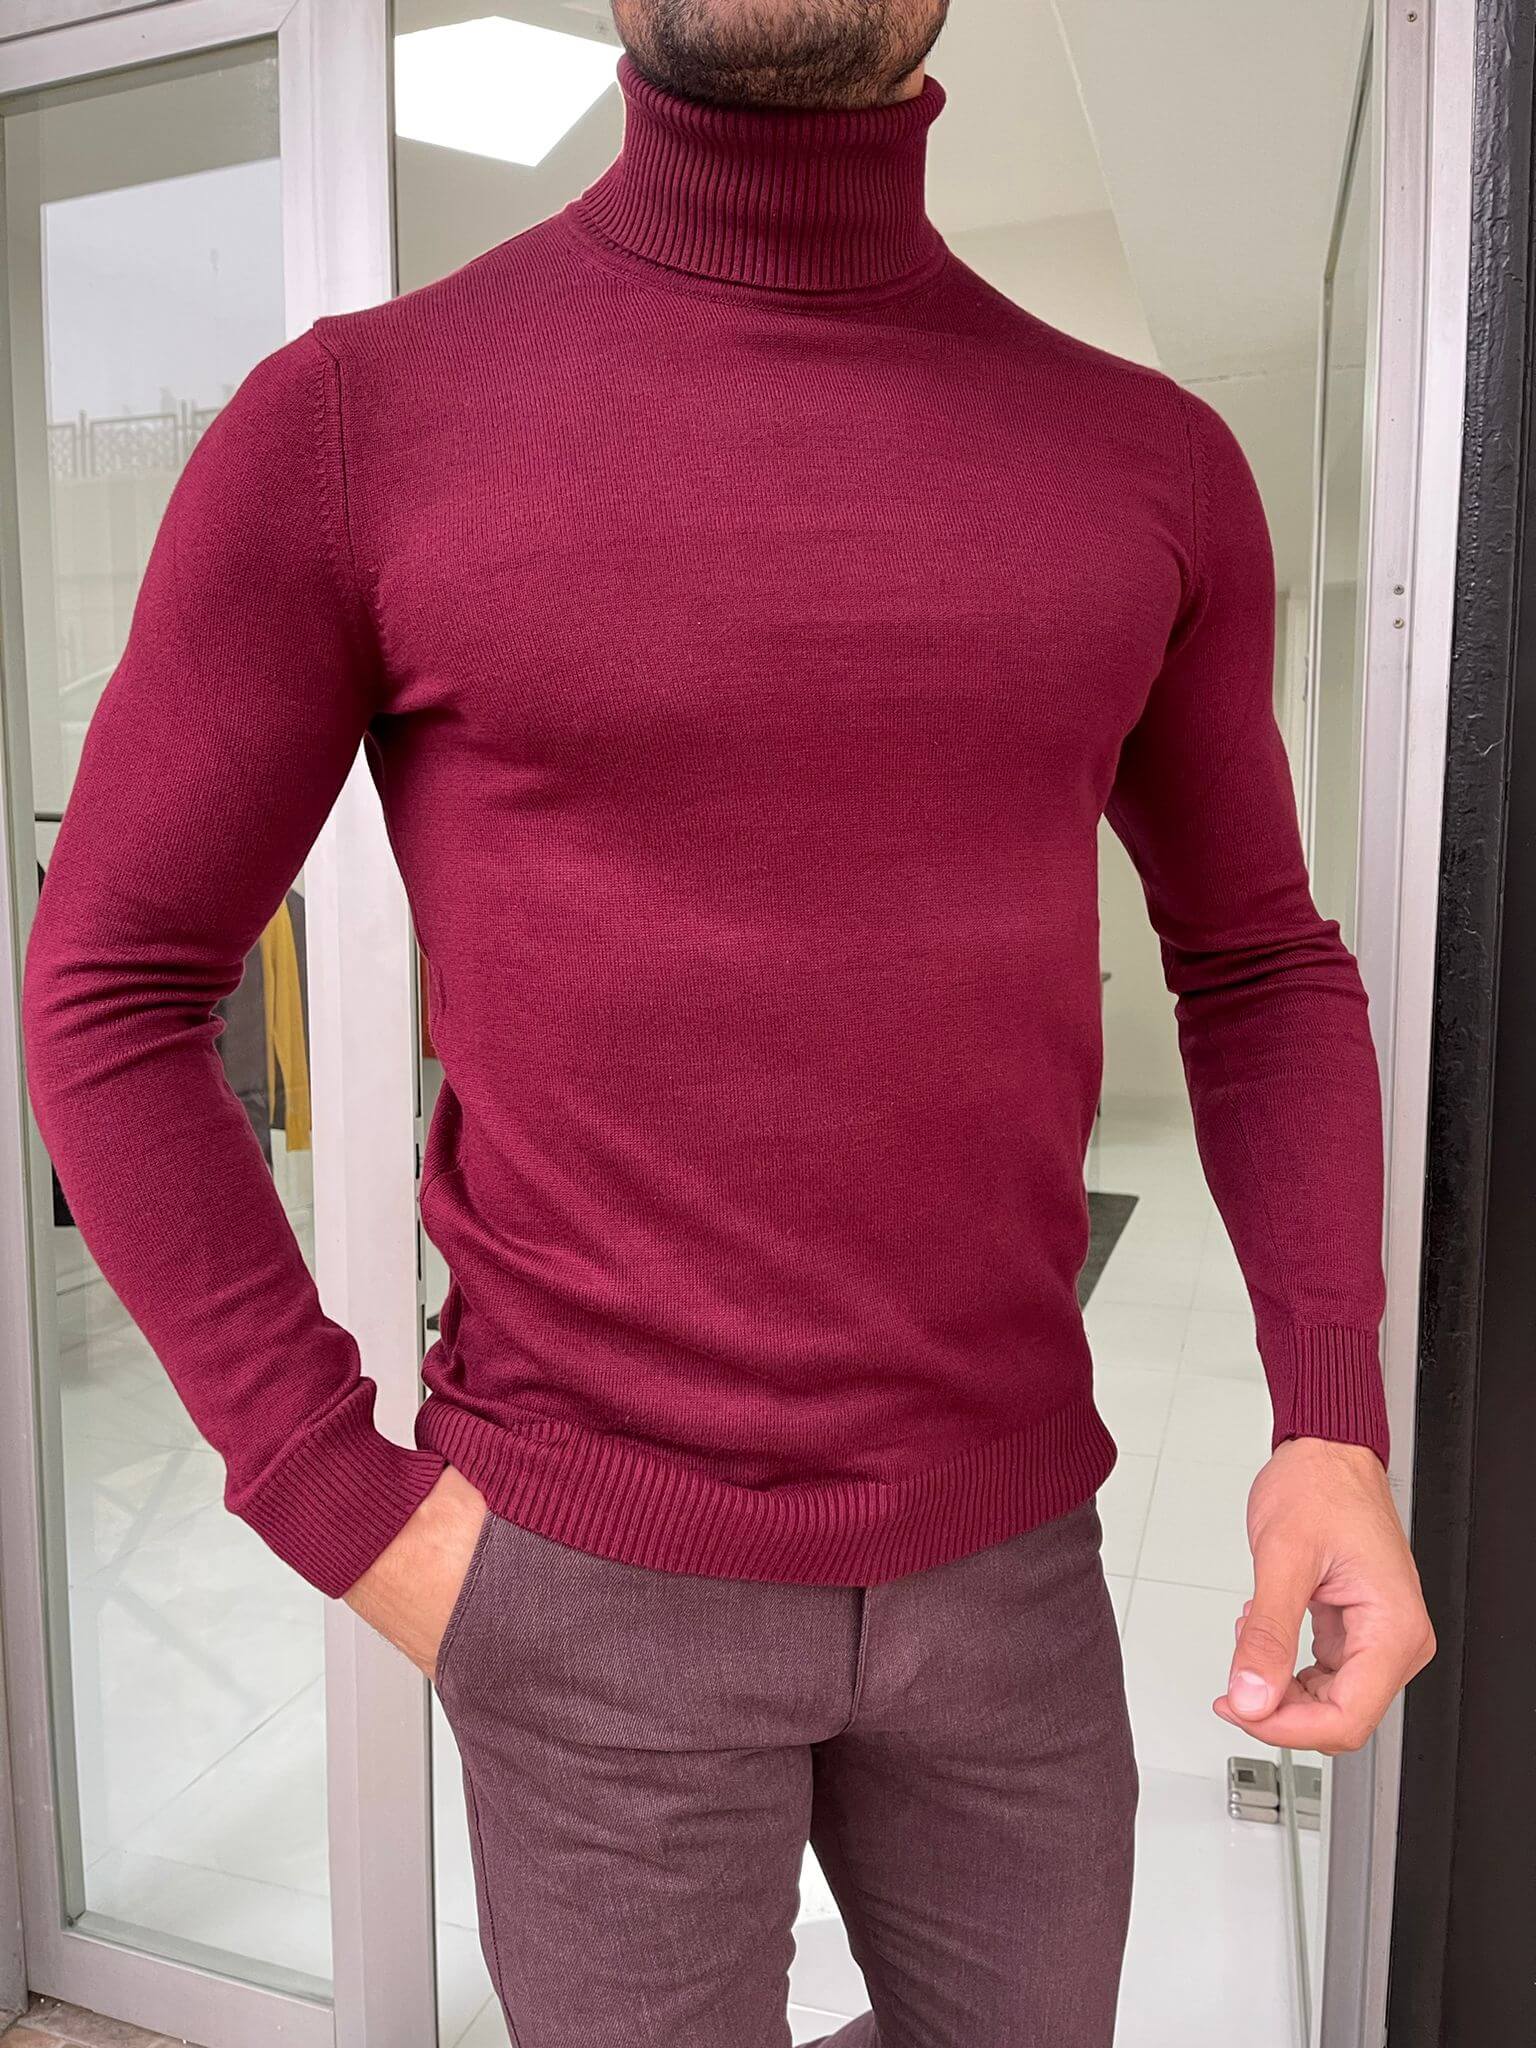 Claret Red Turtleneck sweater, featuring a high neckline and a smooth, ribbed texture.